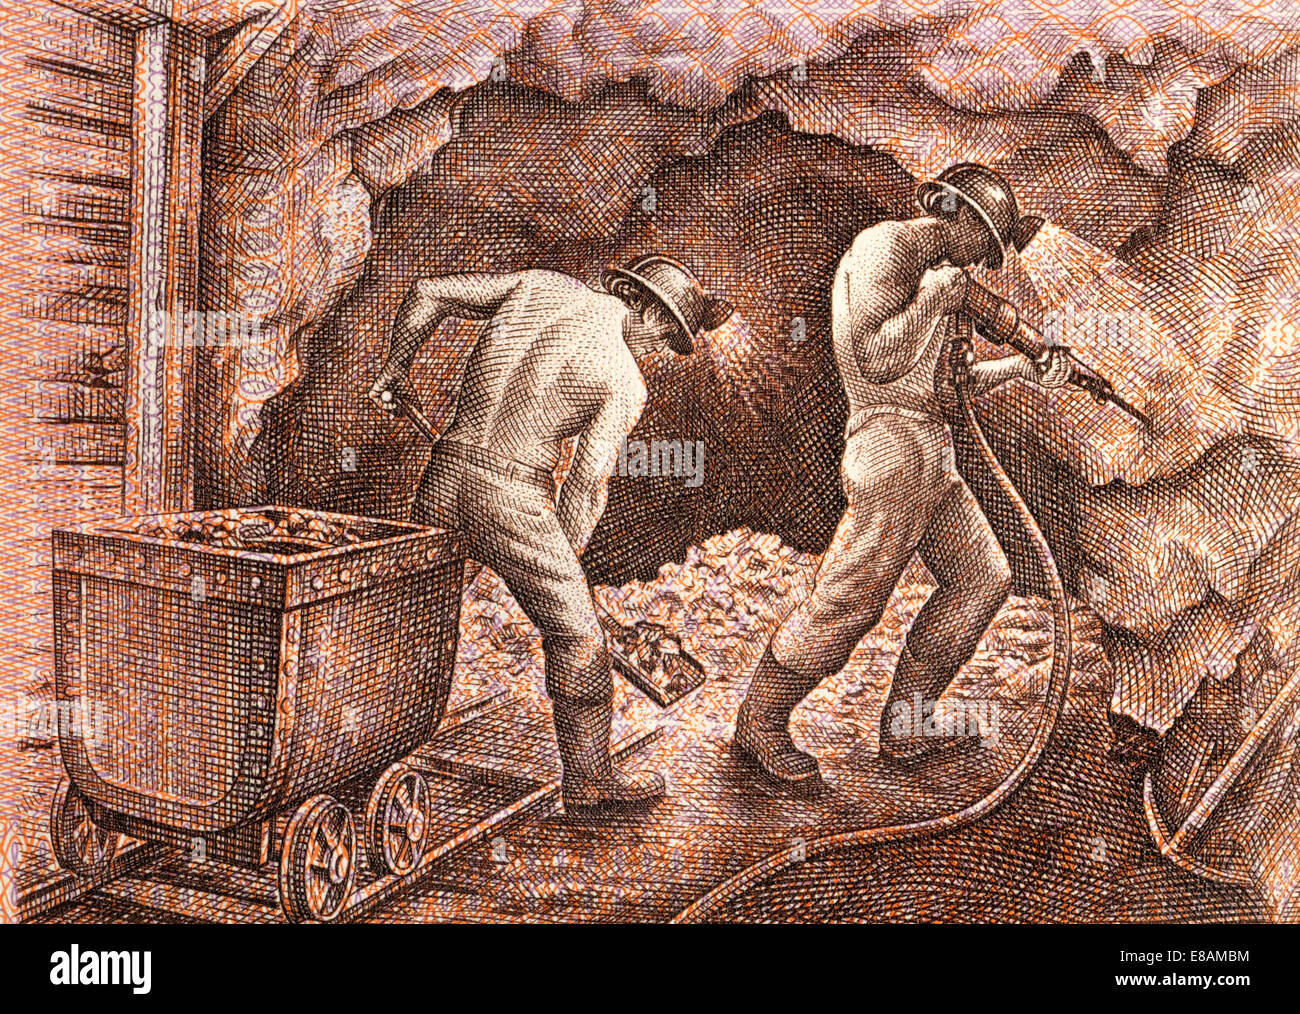 Detail from a Peruvian 5000 Soles banknote showing miners Stock Photo